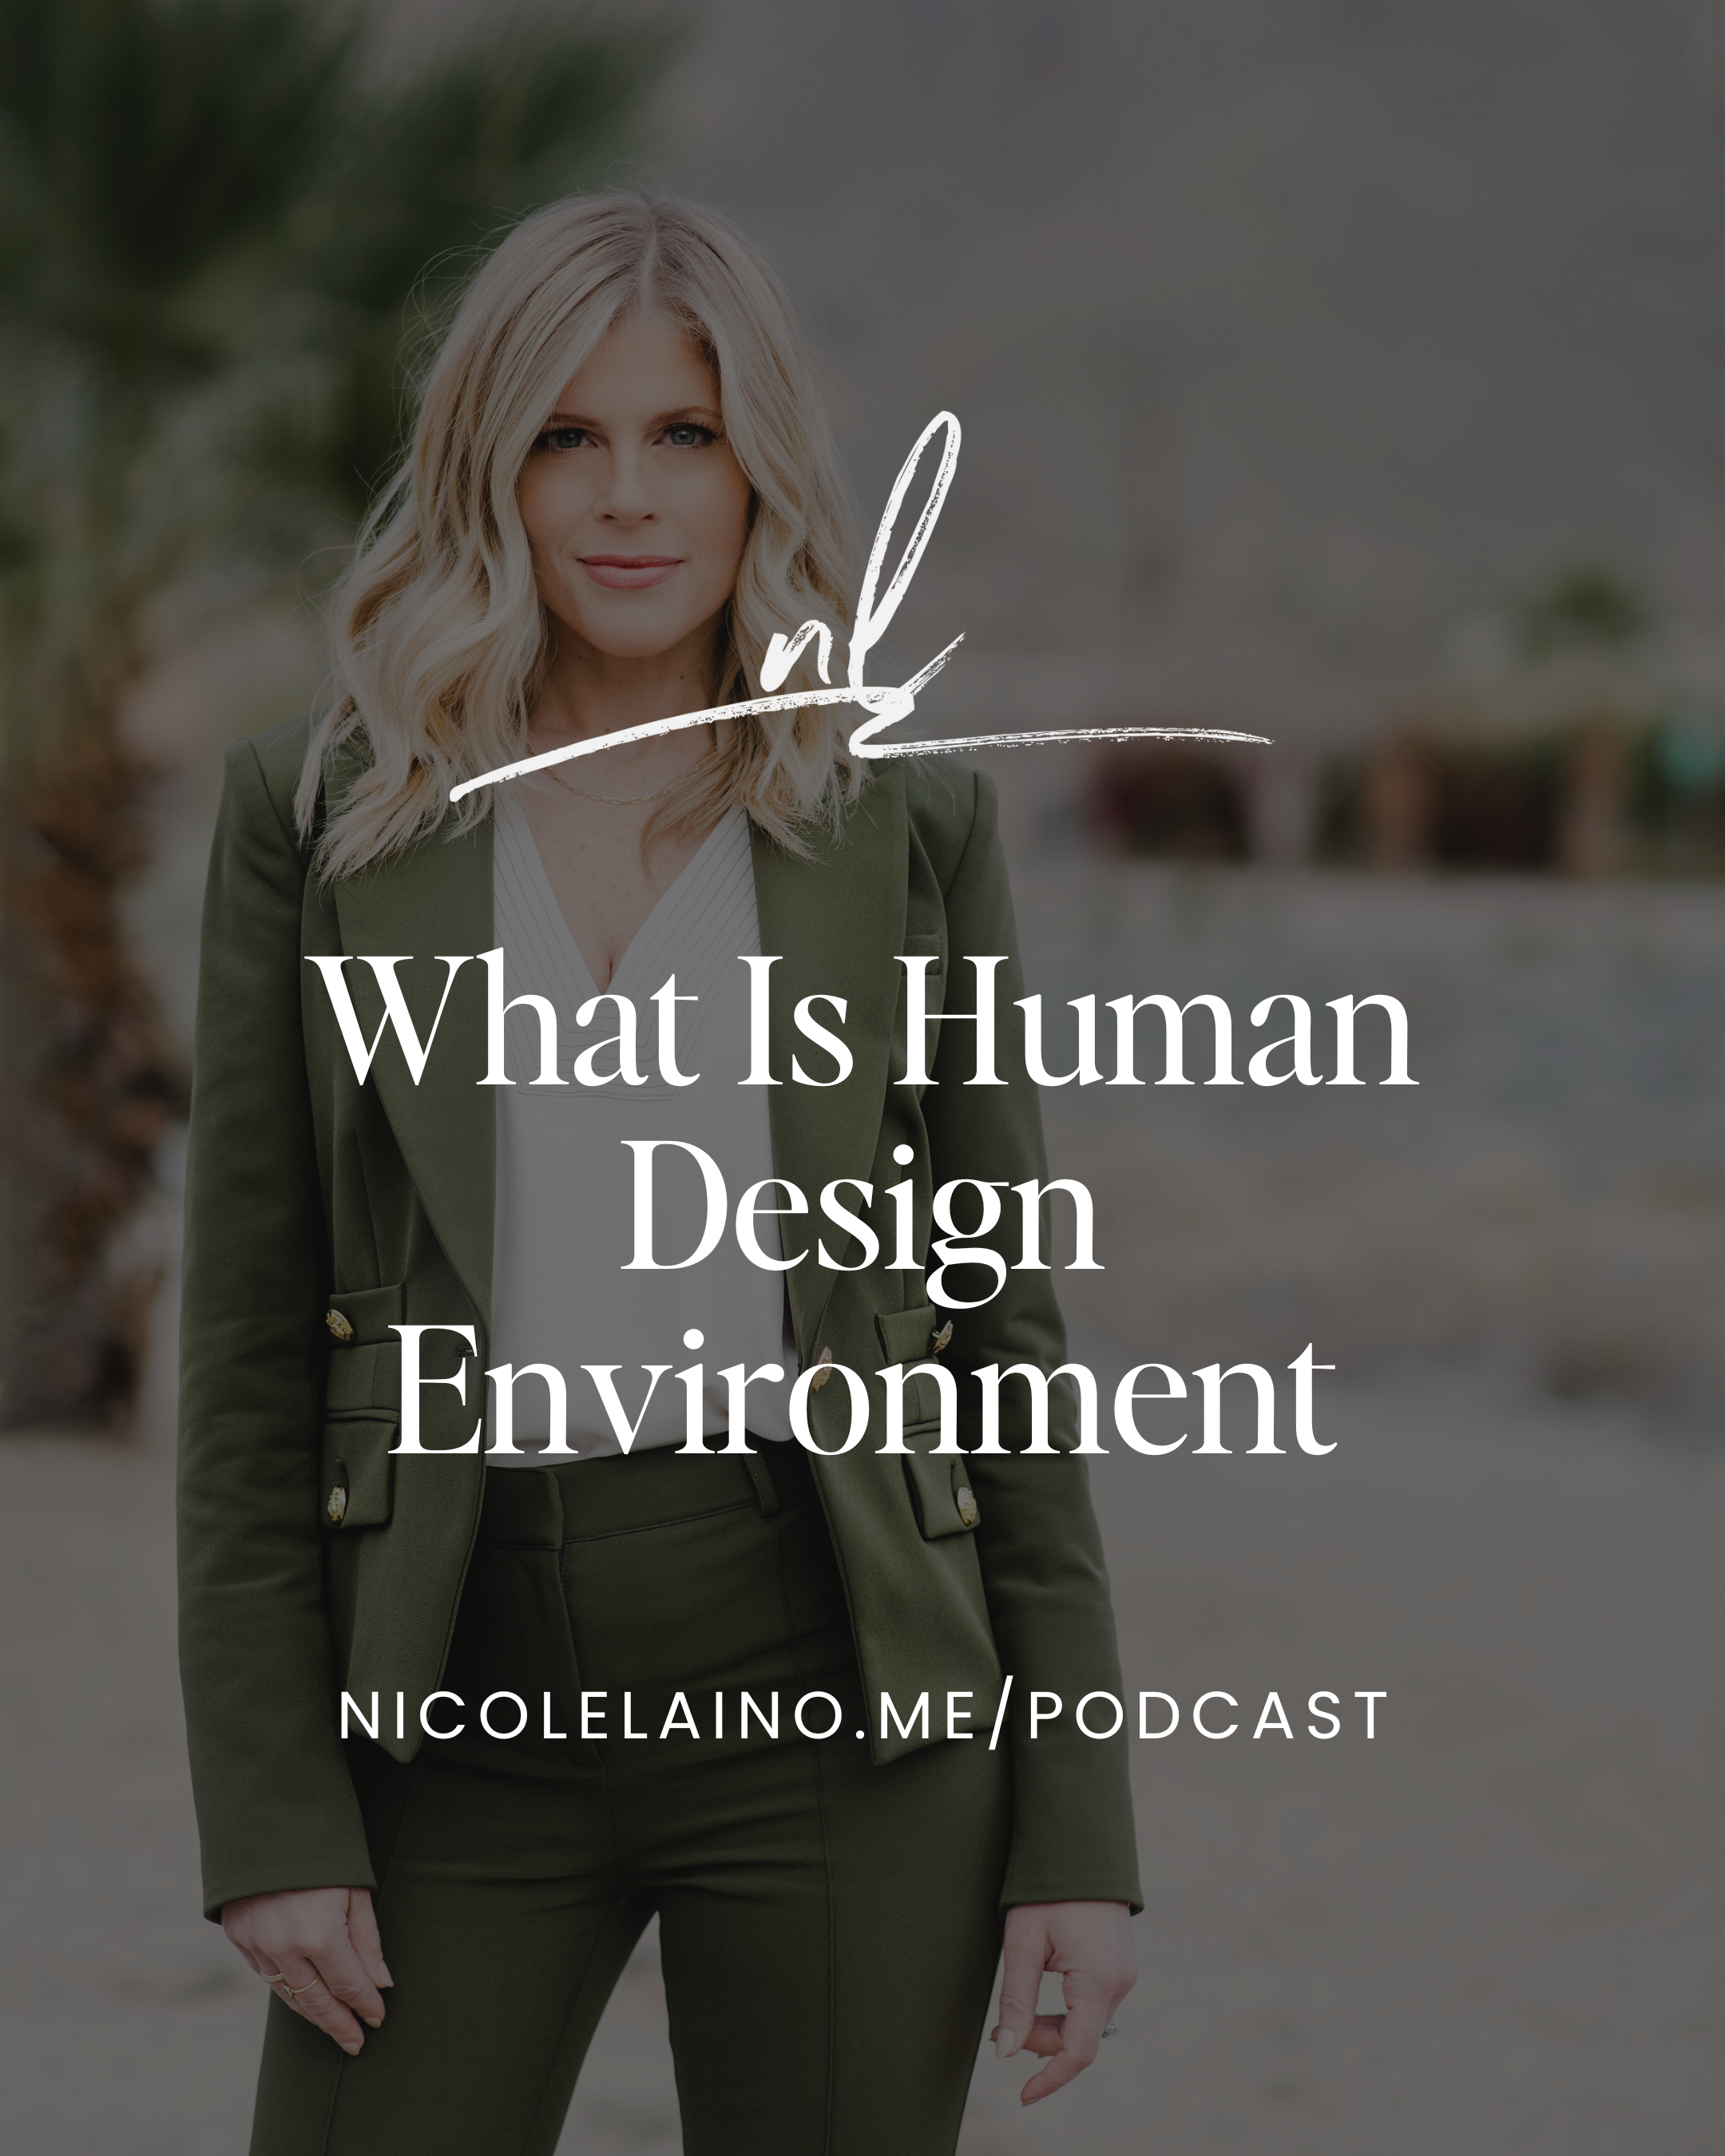 What Is Human Design Environment?